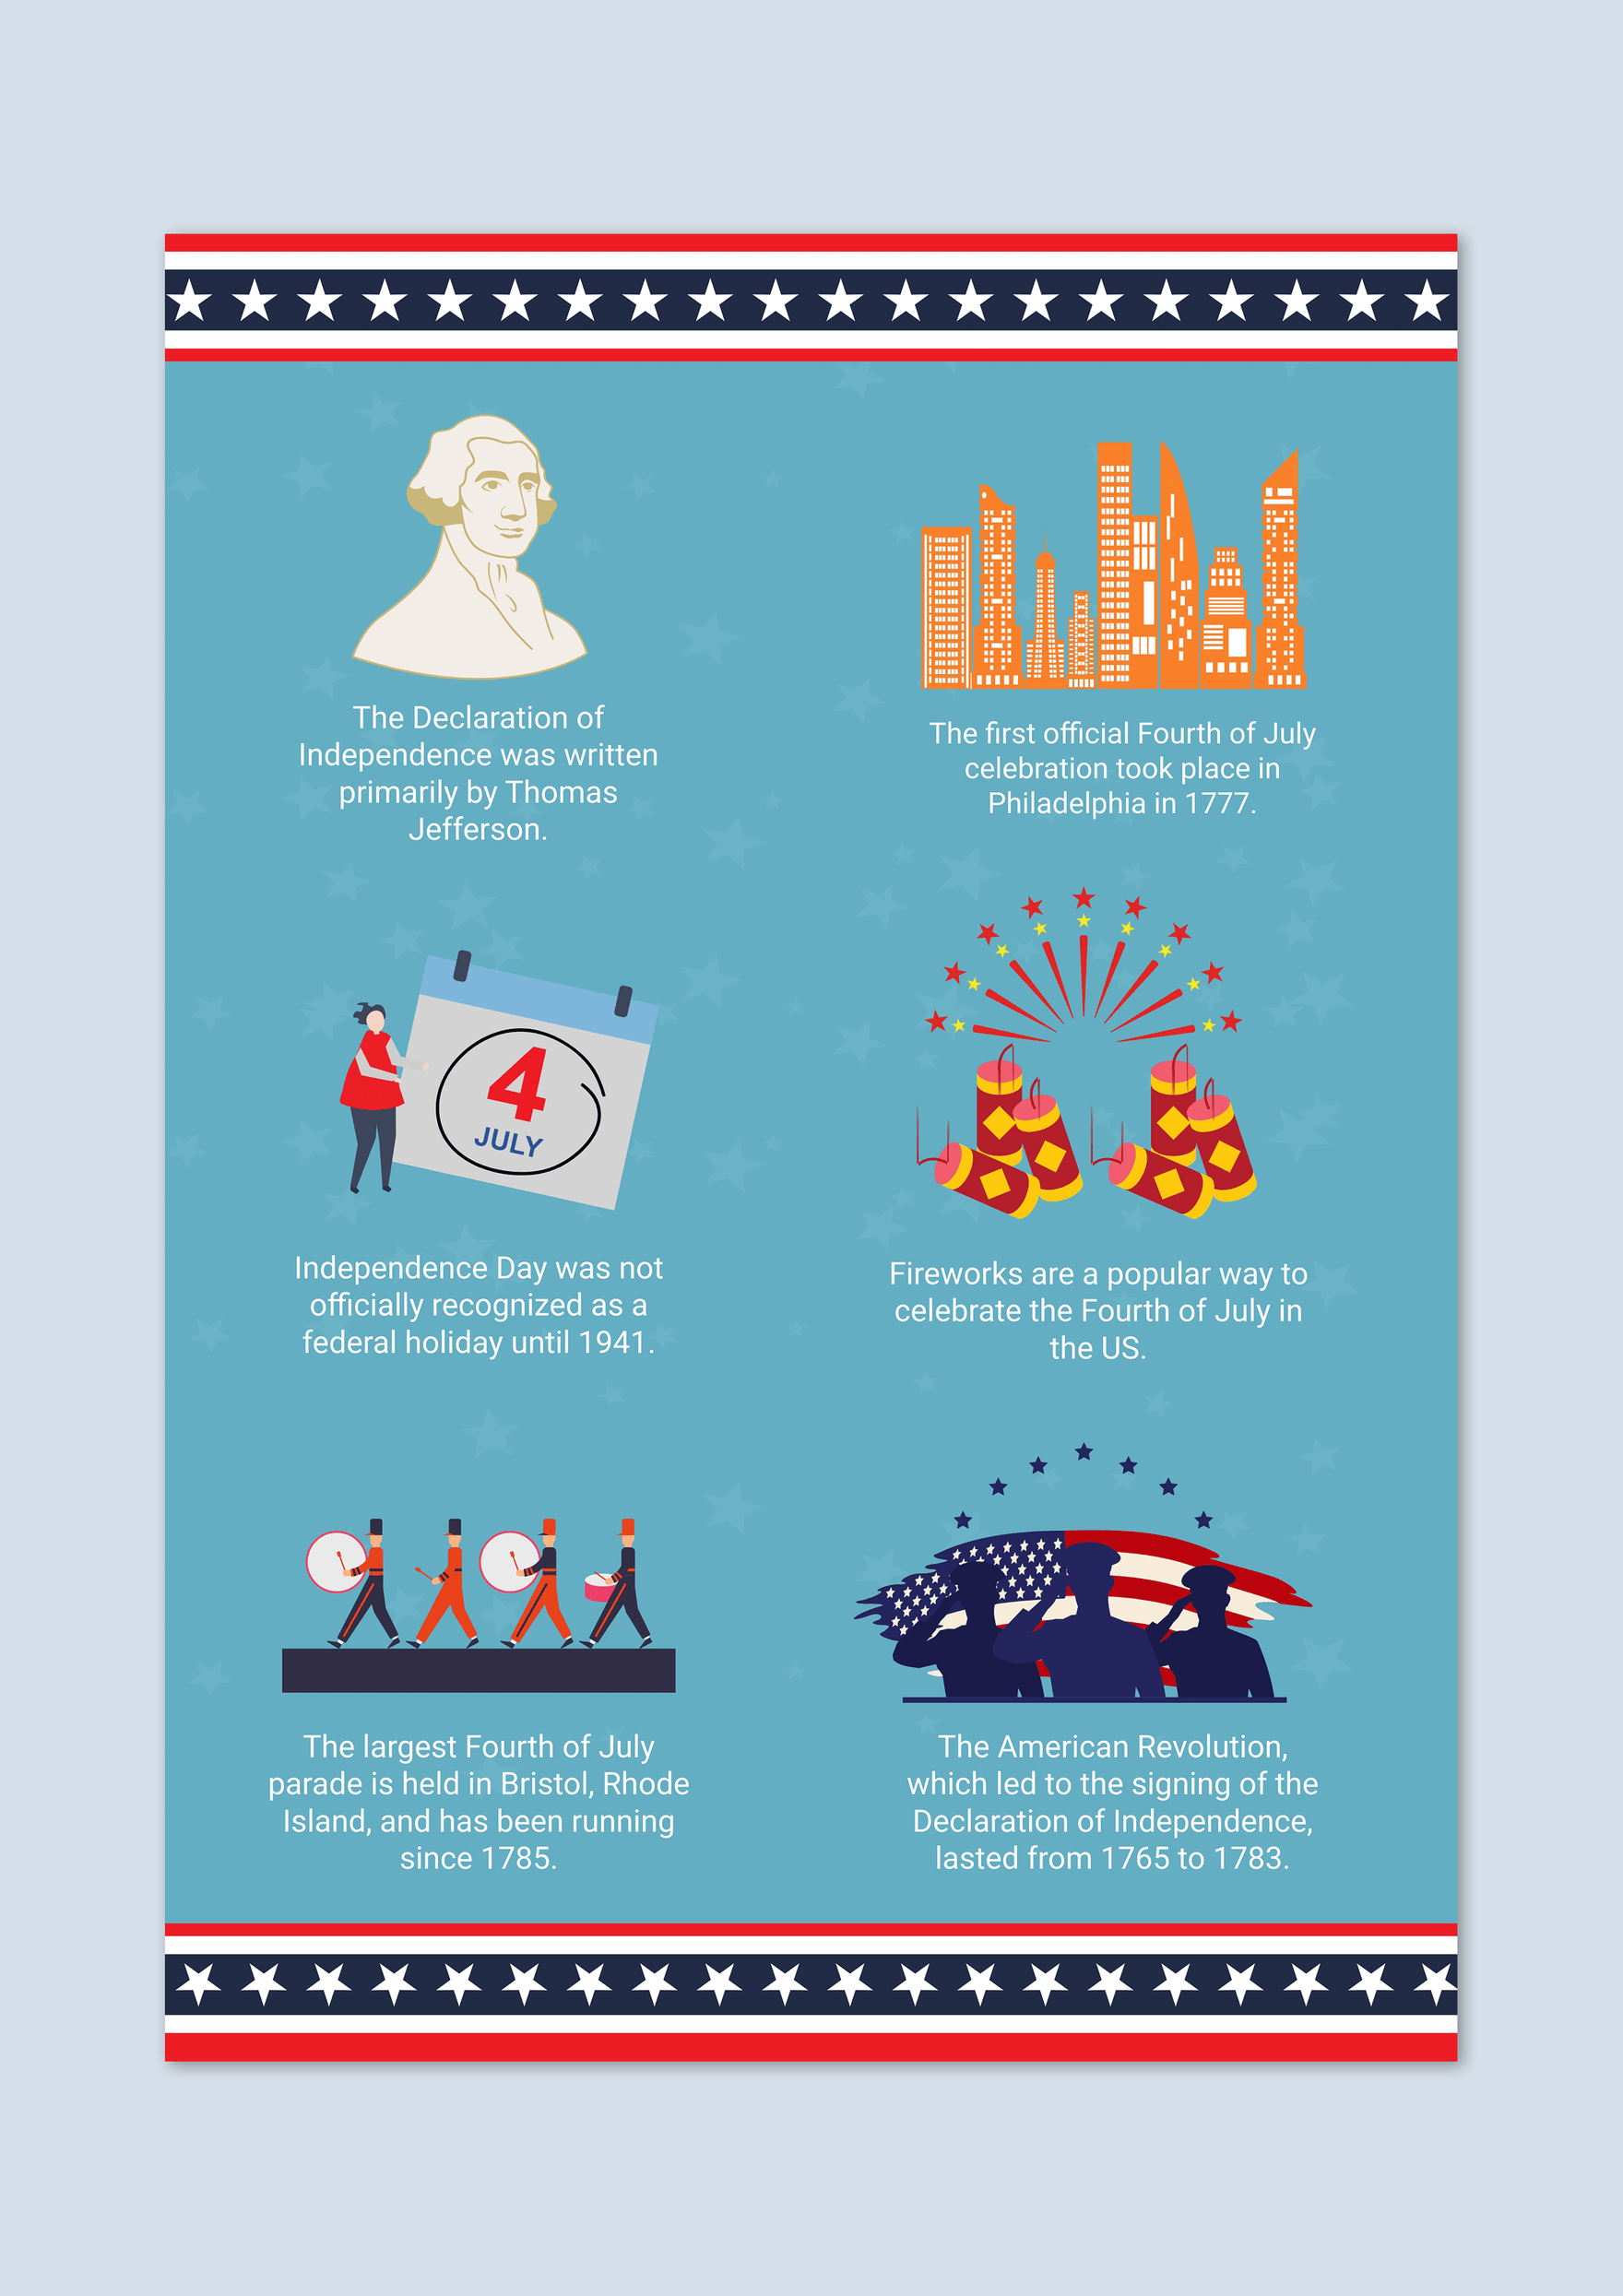 July 4th Infographic